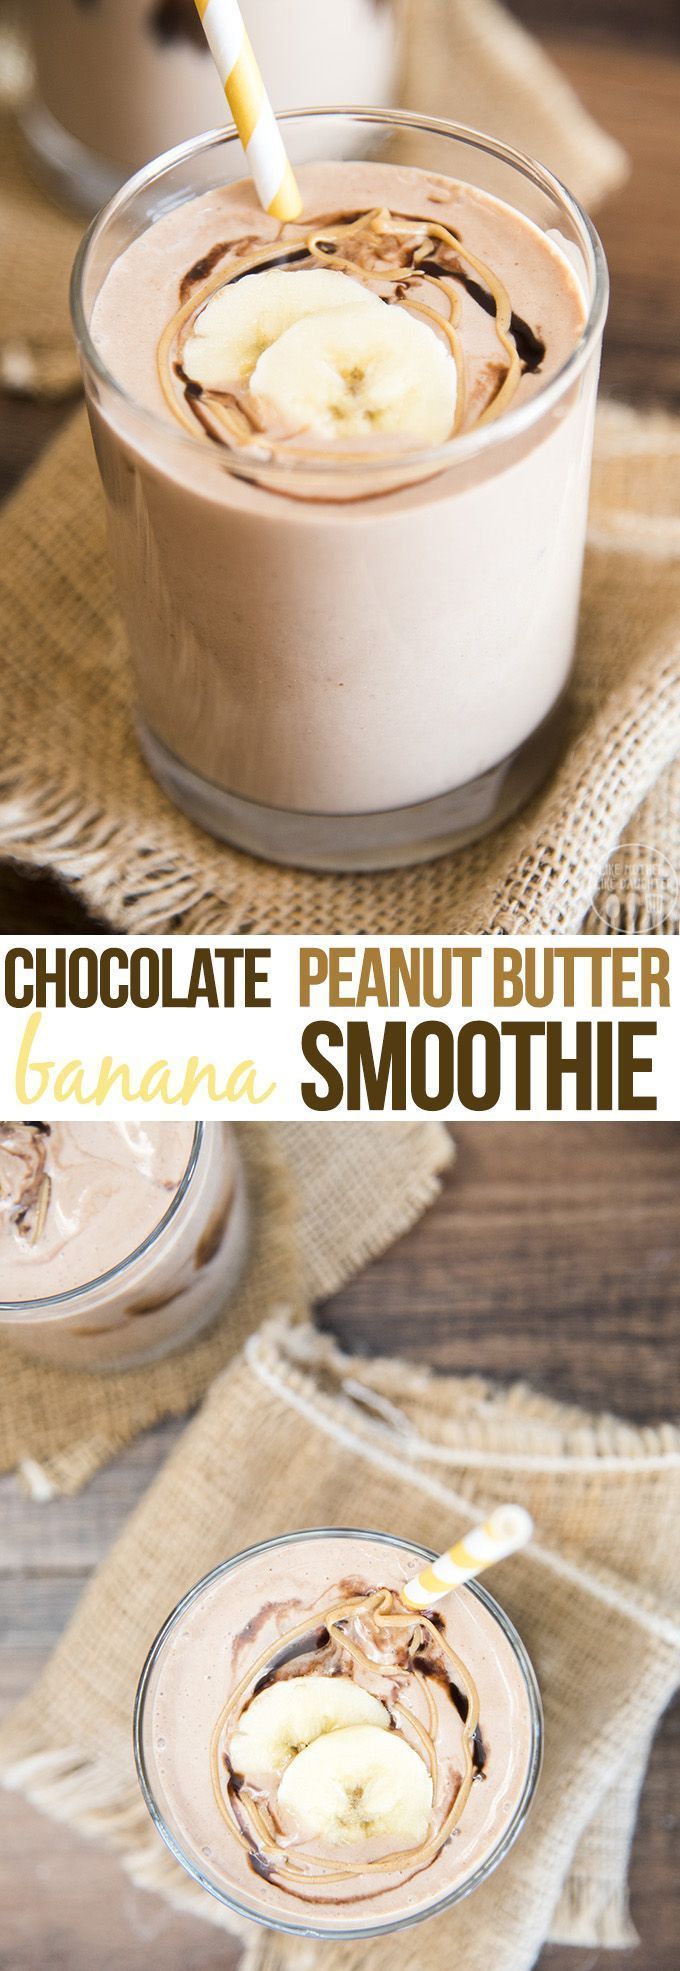 Chocolate Peanut Butter Banana Smoothie - This easy smoothie is the perfect creamy smoothie for a sweet breakfast or lighter dessert! -   24 breakfast smoothie recipes
 ideas